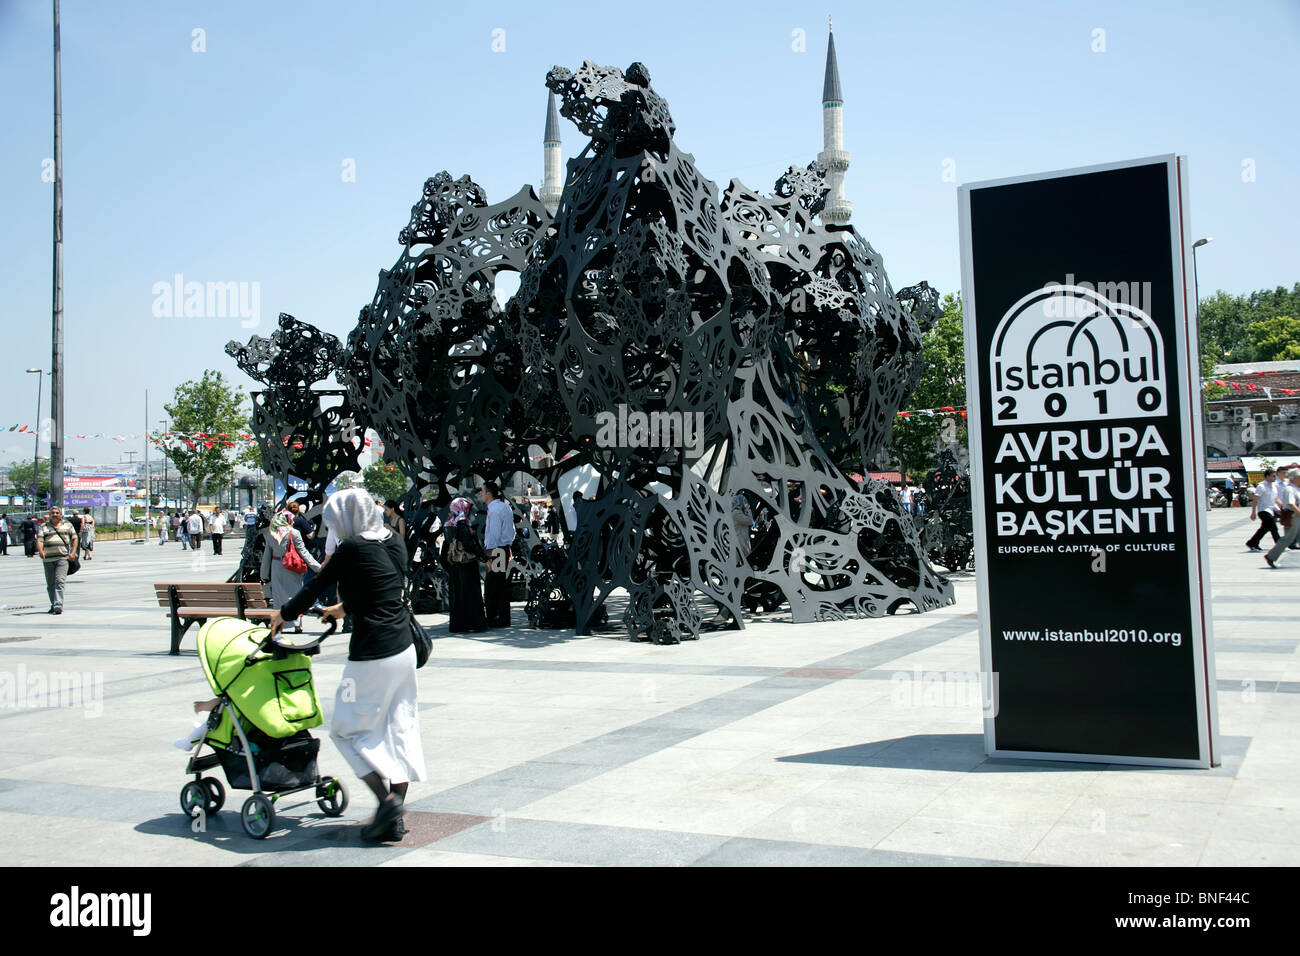 Contemporary art installation erected for the 2010 European City of Culture in Eminonu, Istanbul, Turkey Stock Photo